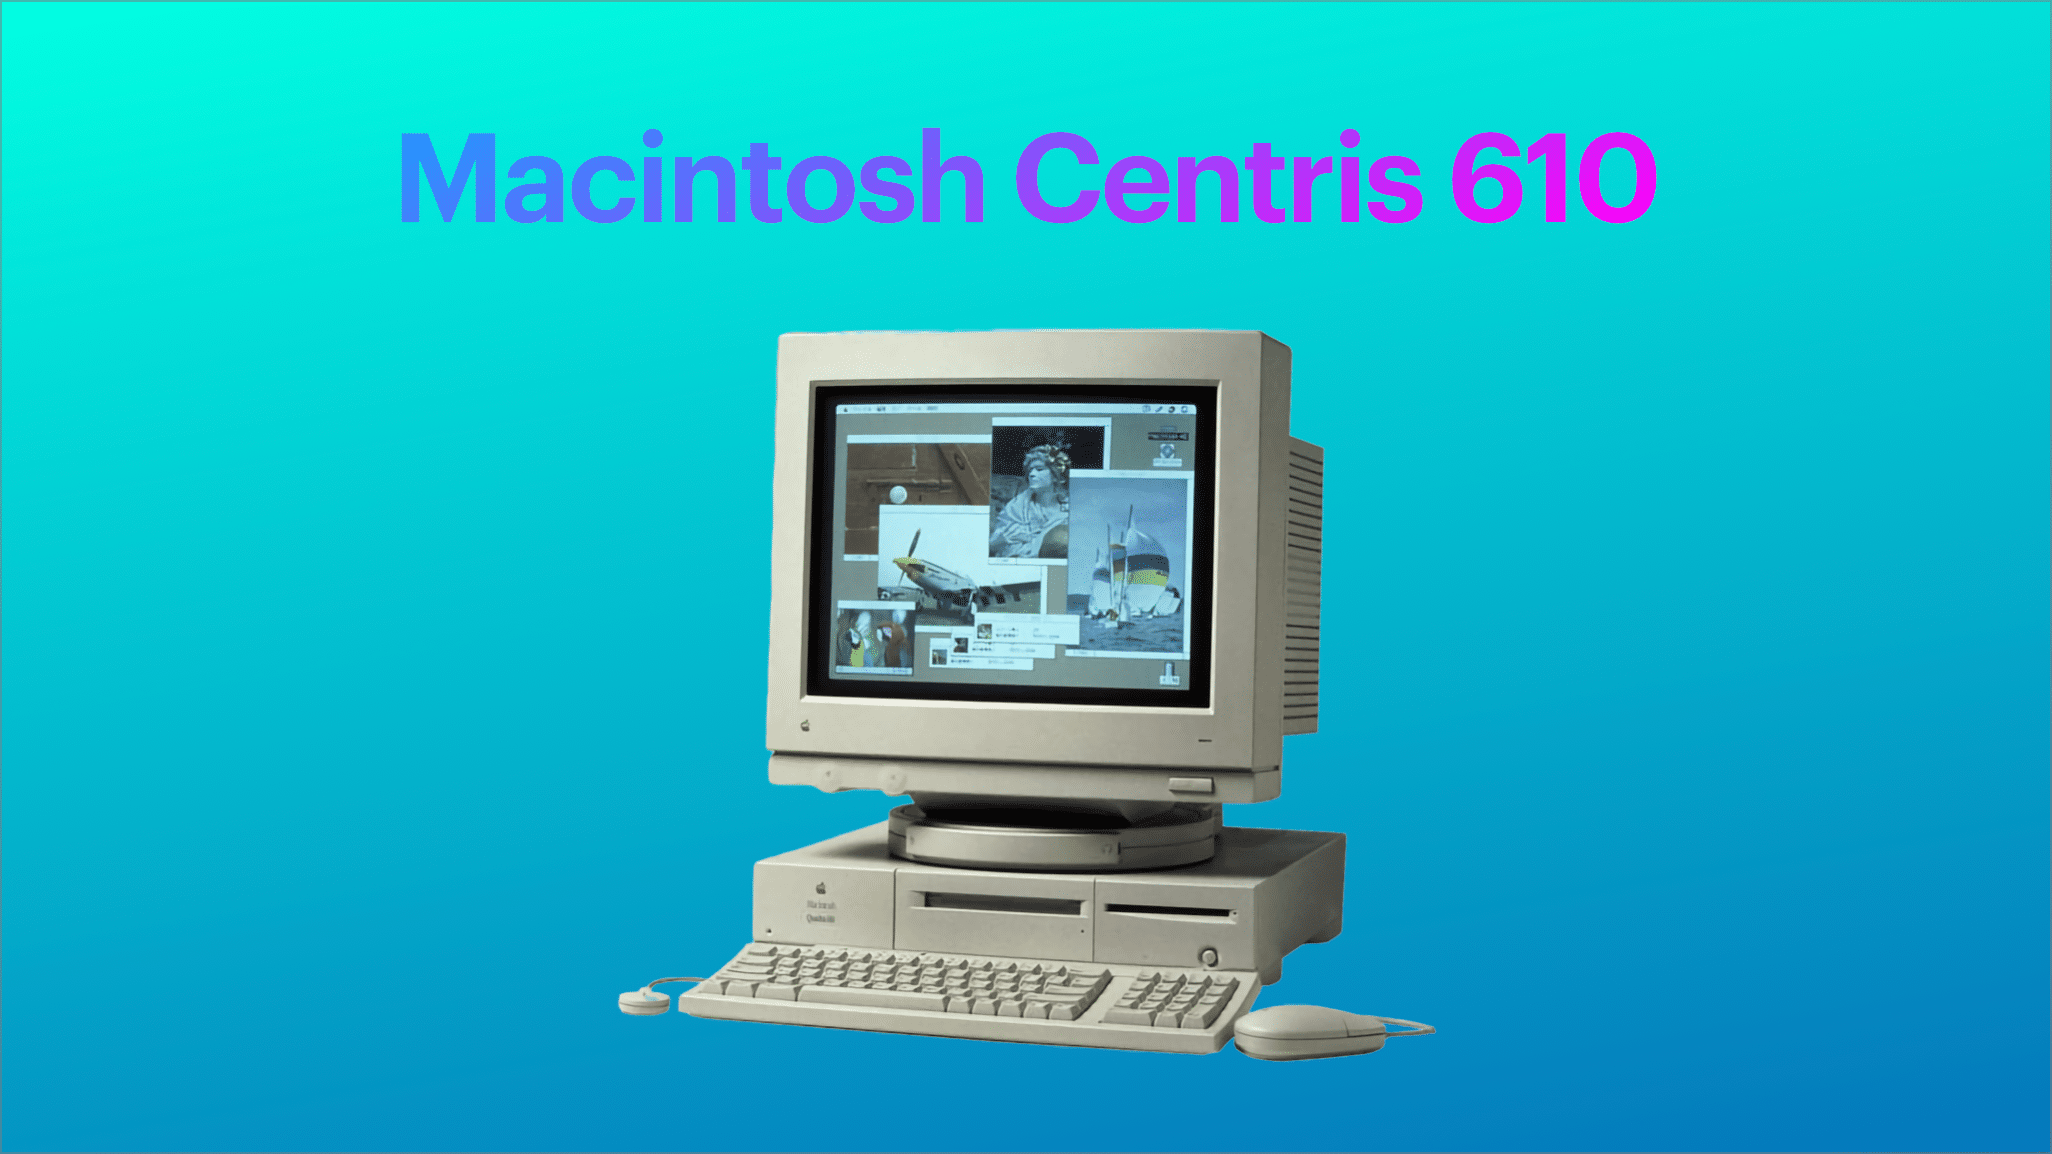 Remembering My Story of Owning a Macintosh Centris 610 — 1993